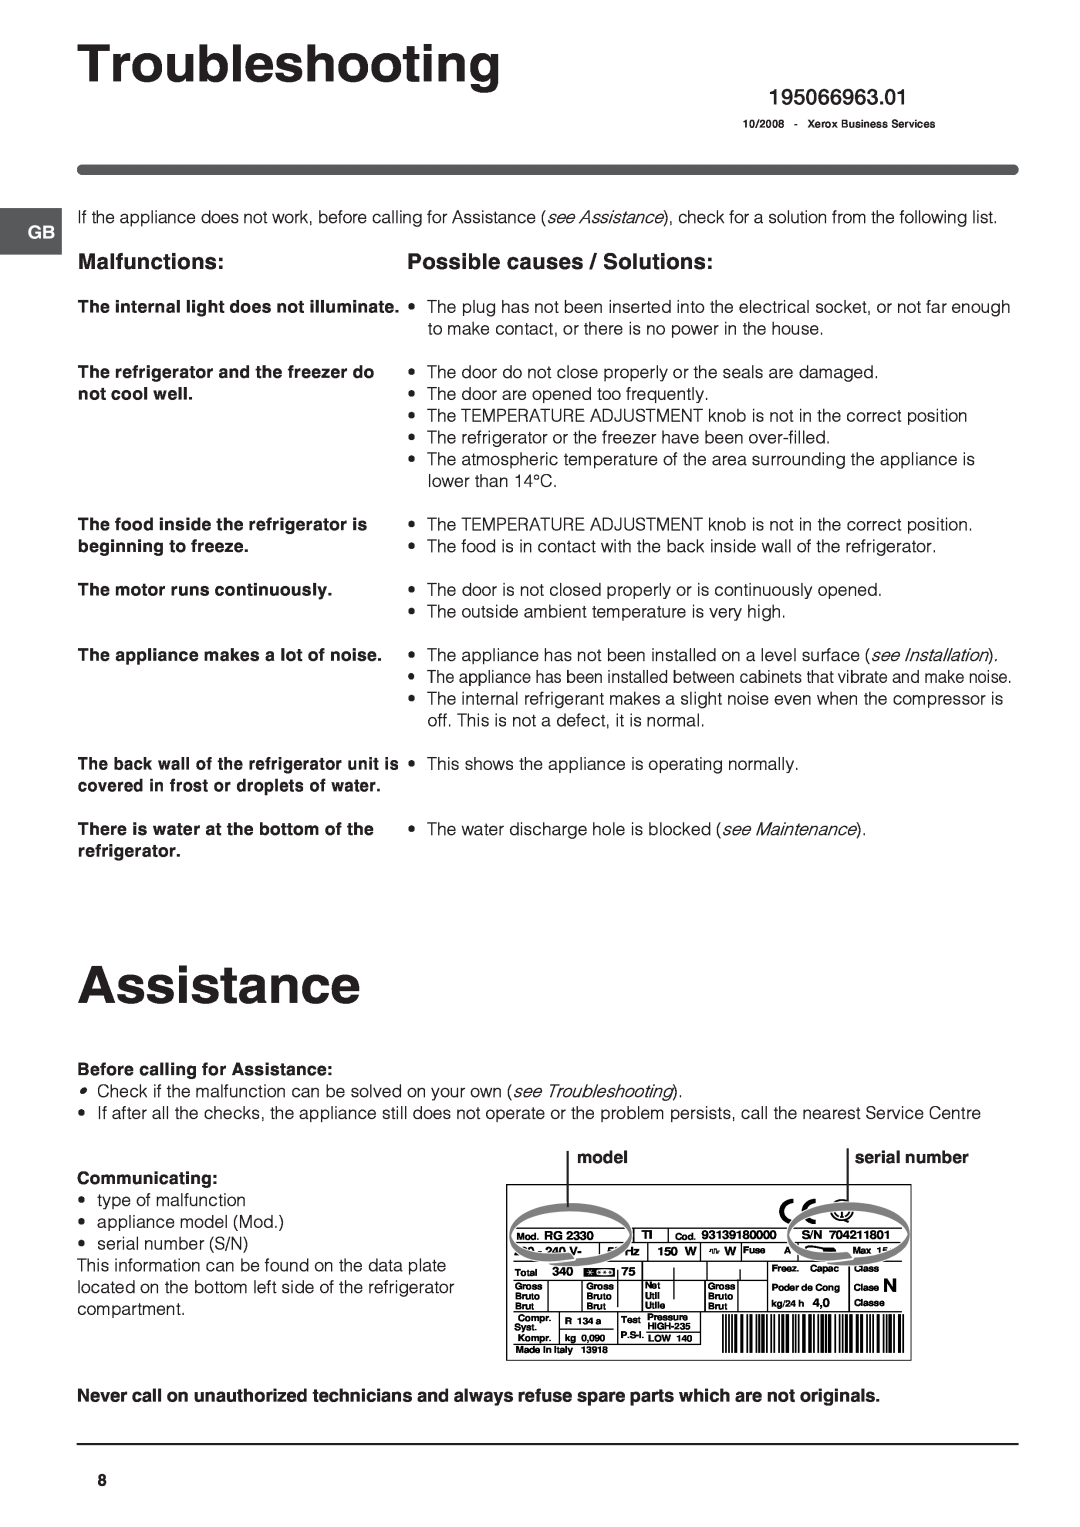 Indesit IN TSZ 1611 UK Troubleshooting, Assistance, Malfunctions, Possible causes / Solutions, 195066963.01 